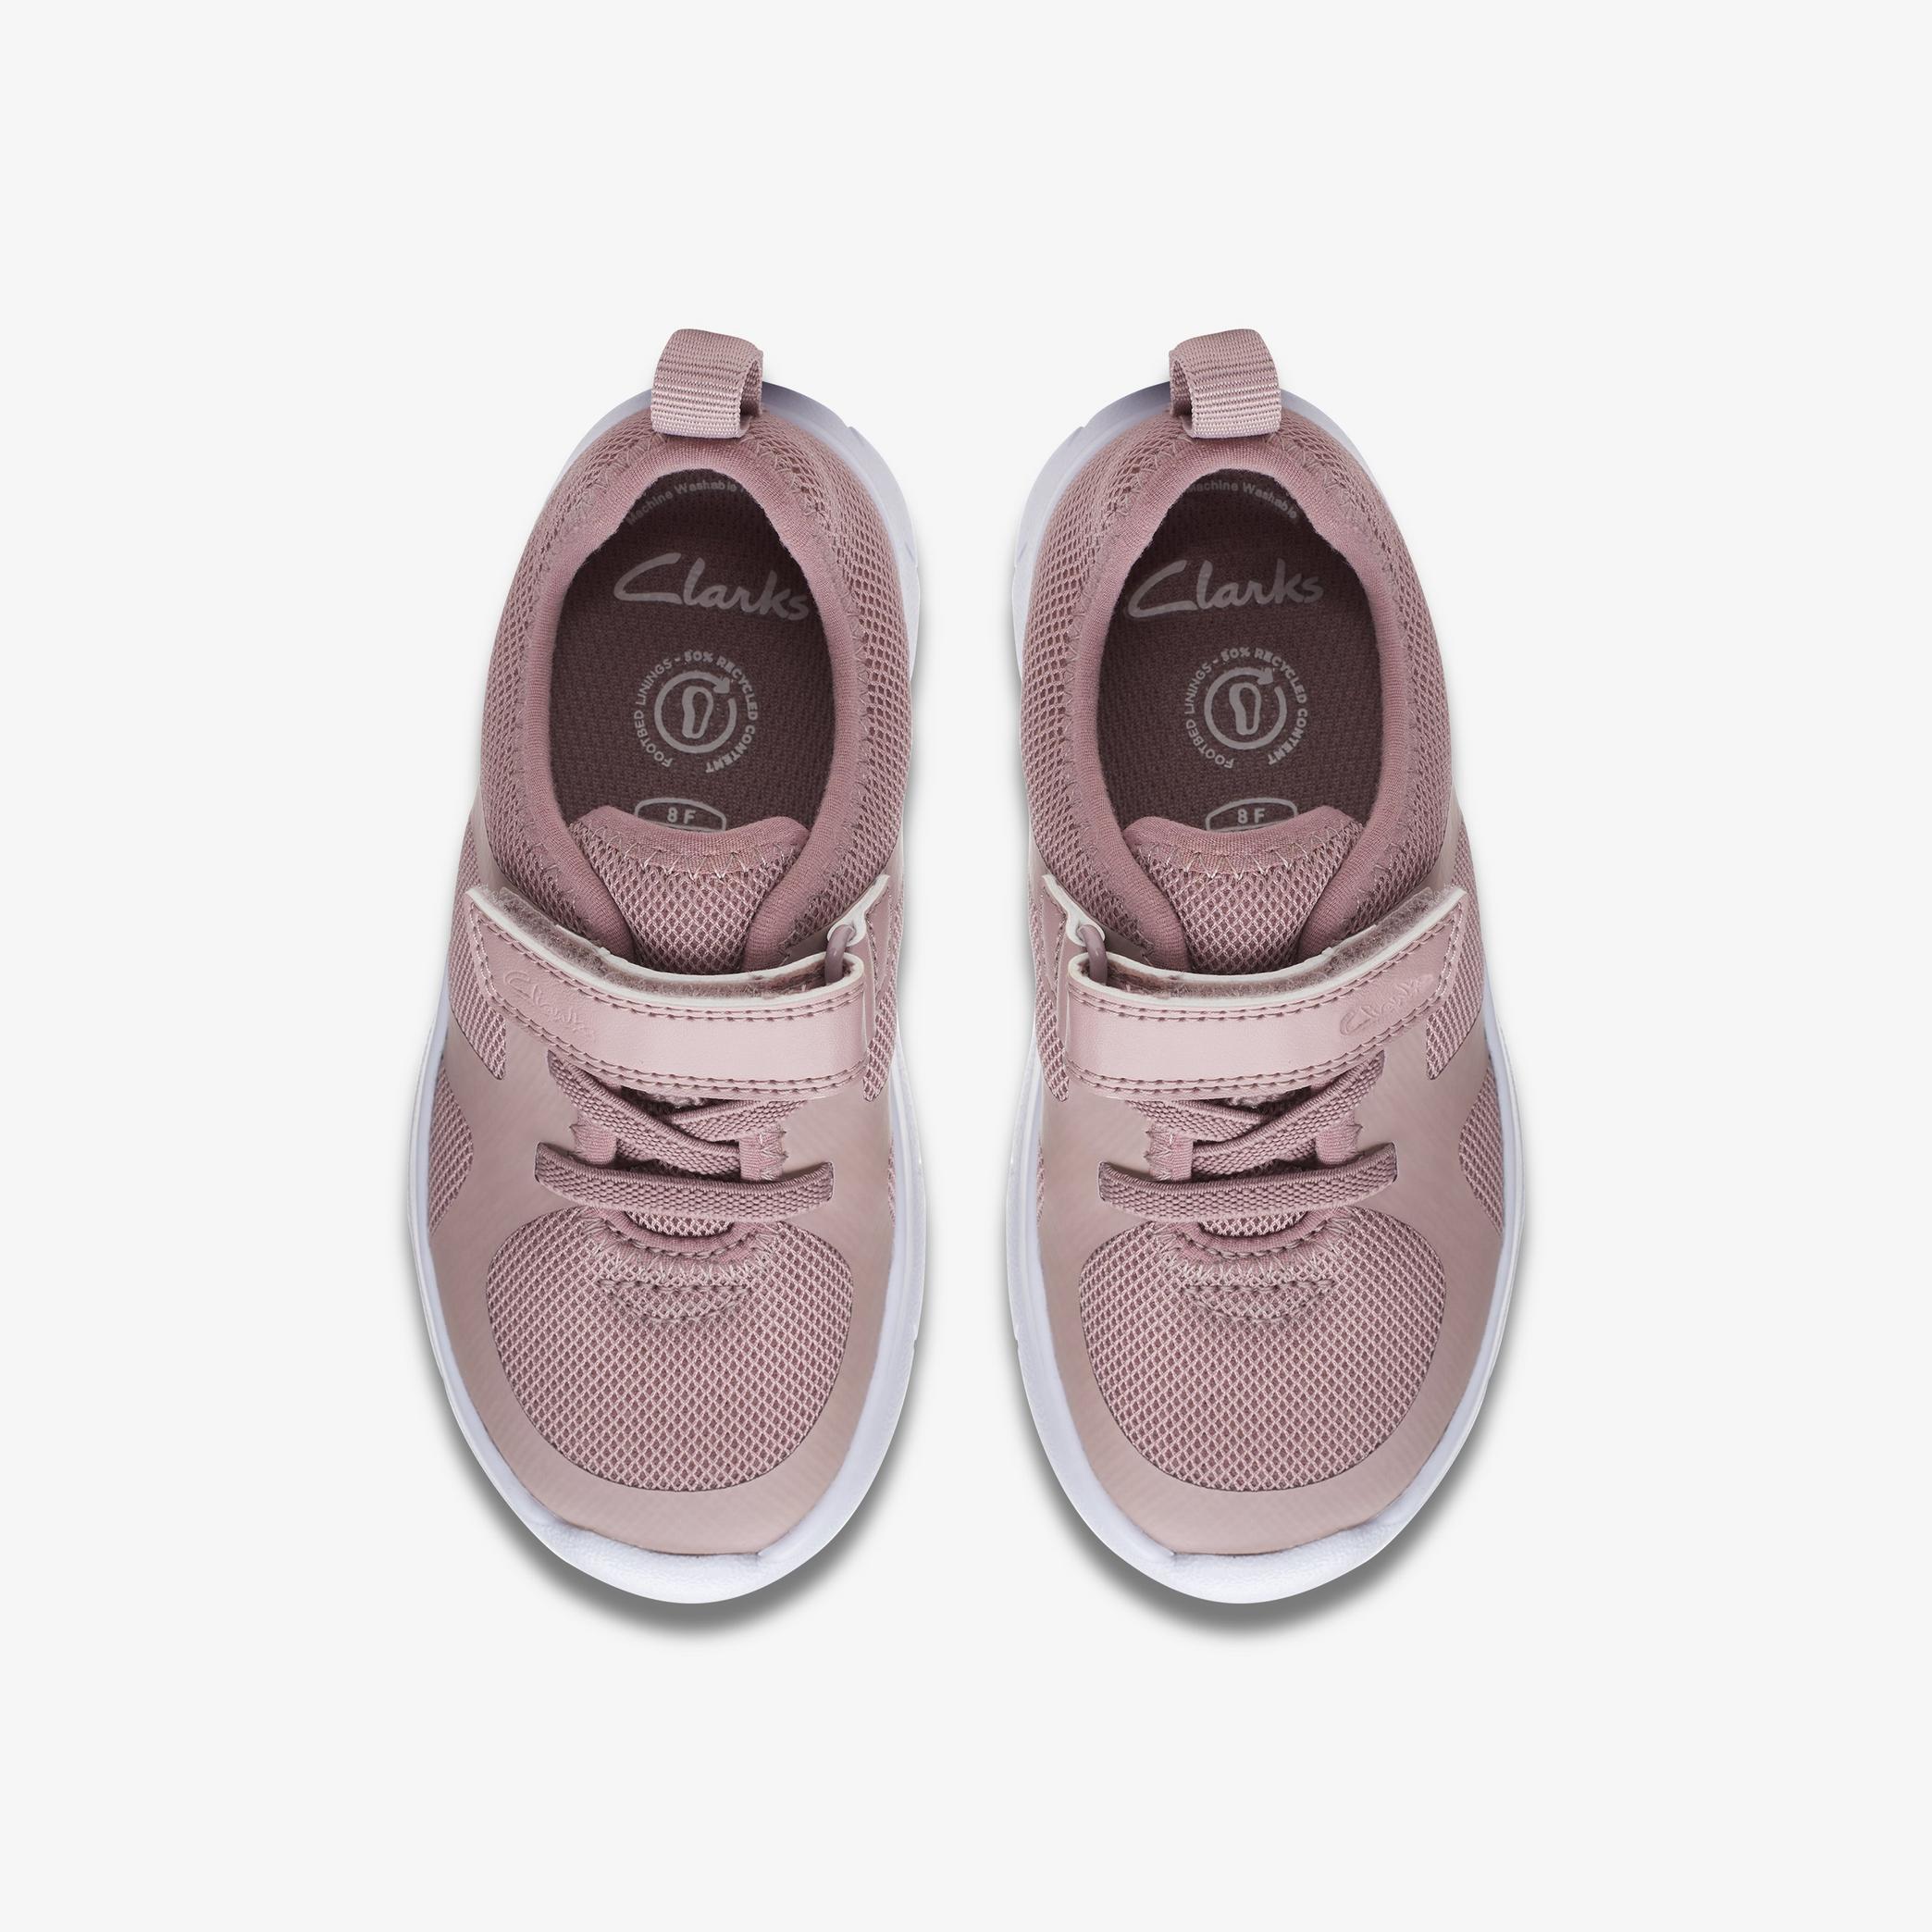 Girls Ath Flux Kid Pink Trainers | Clarks UK